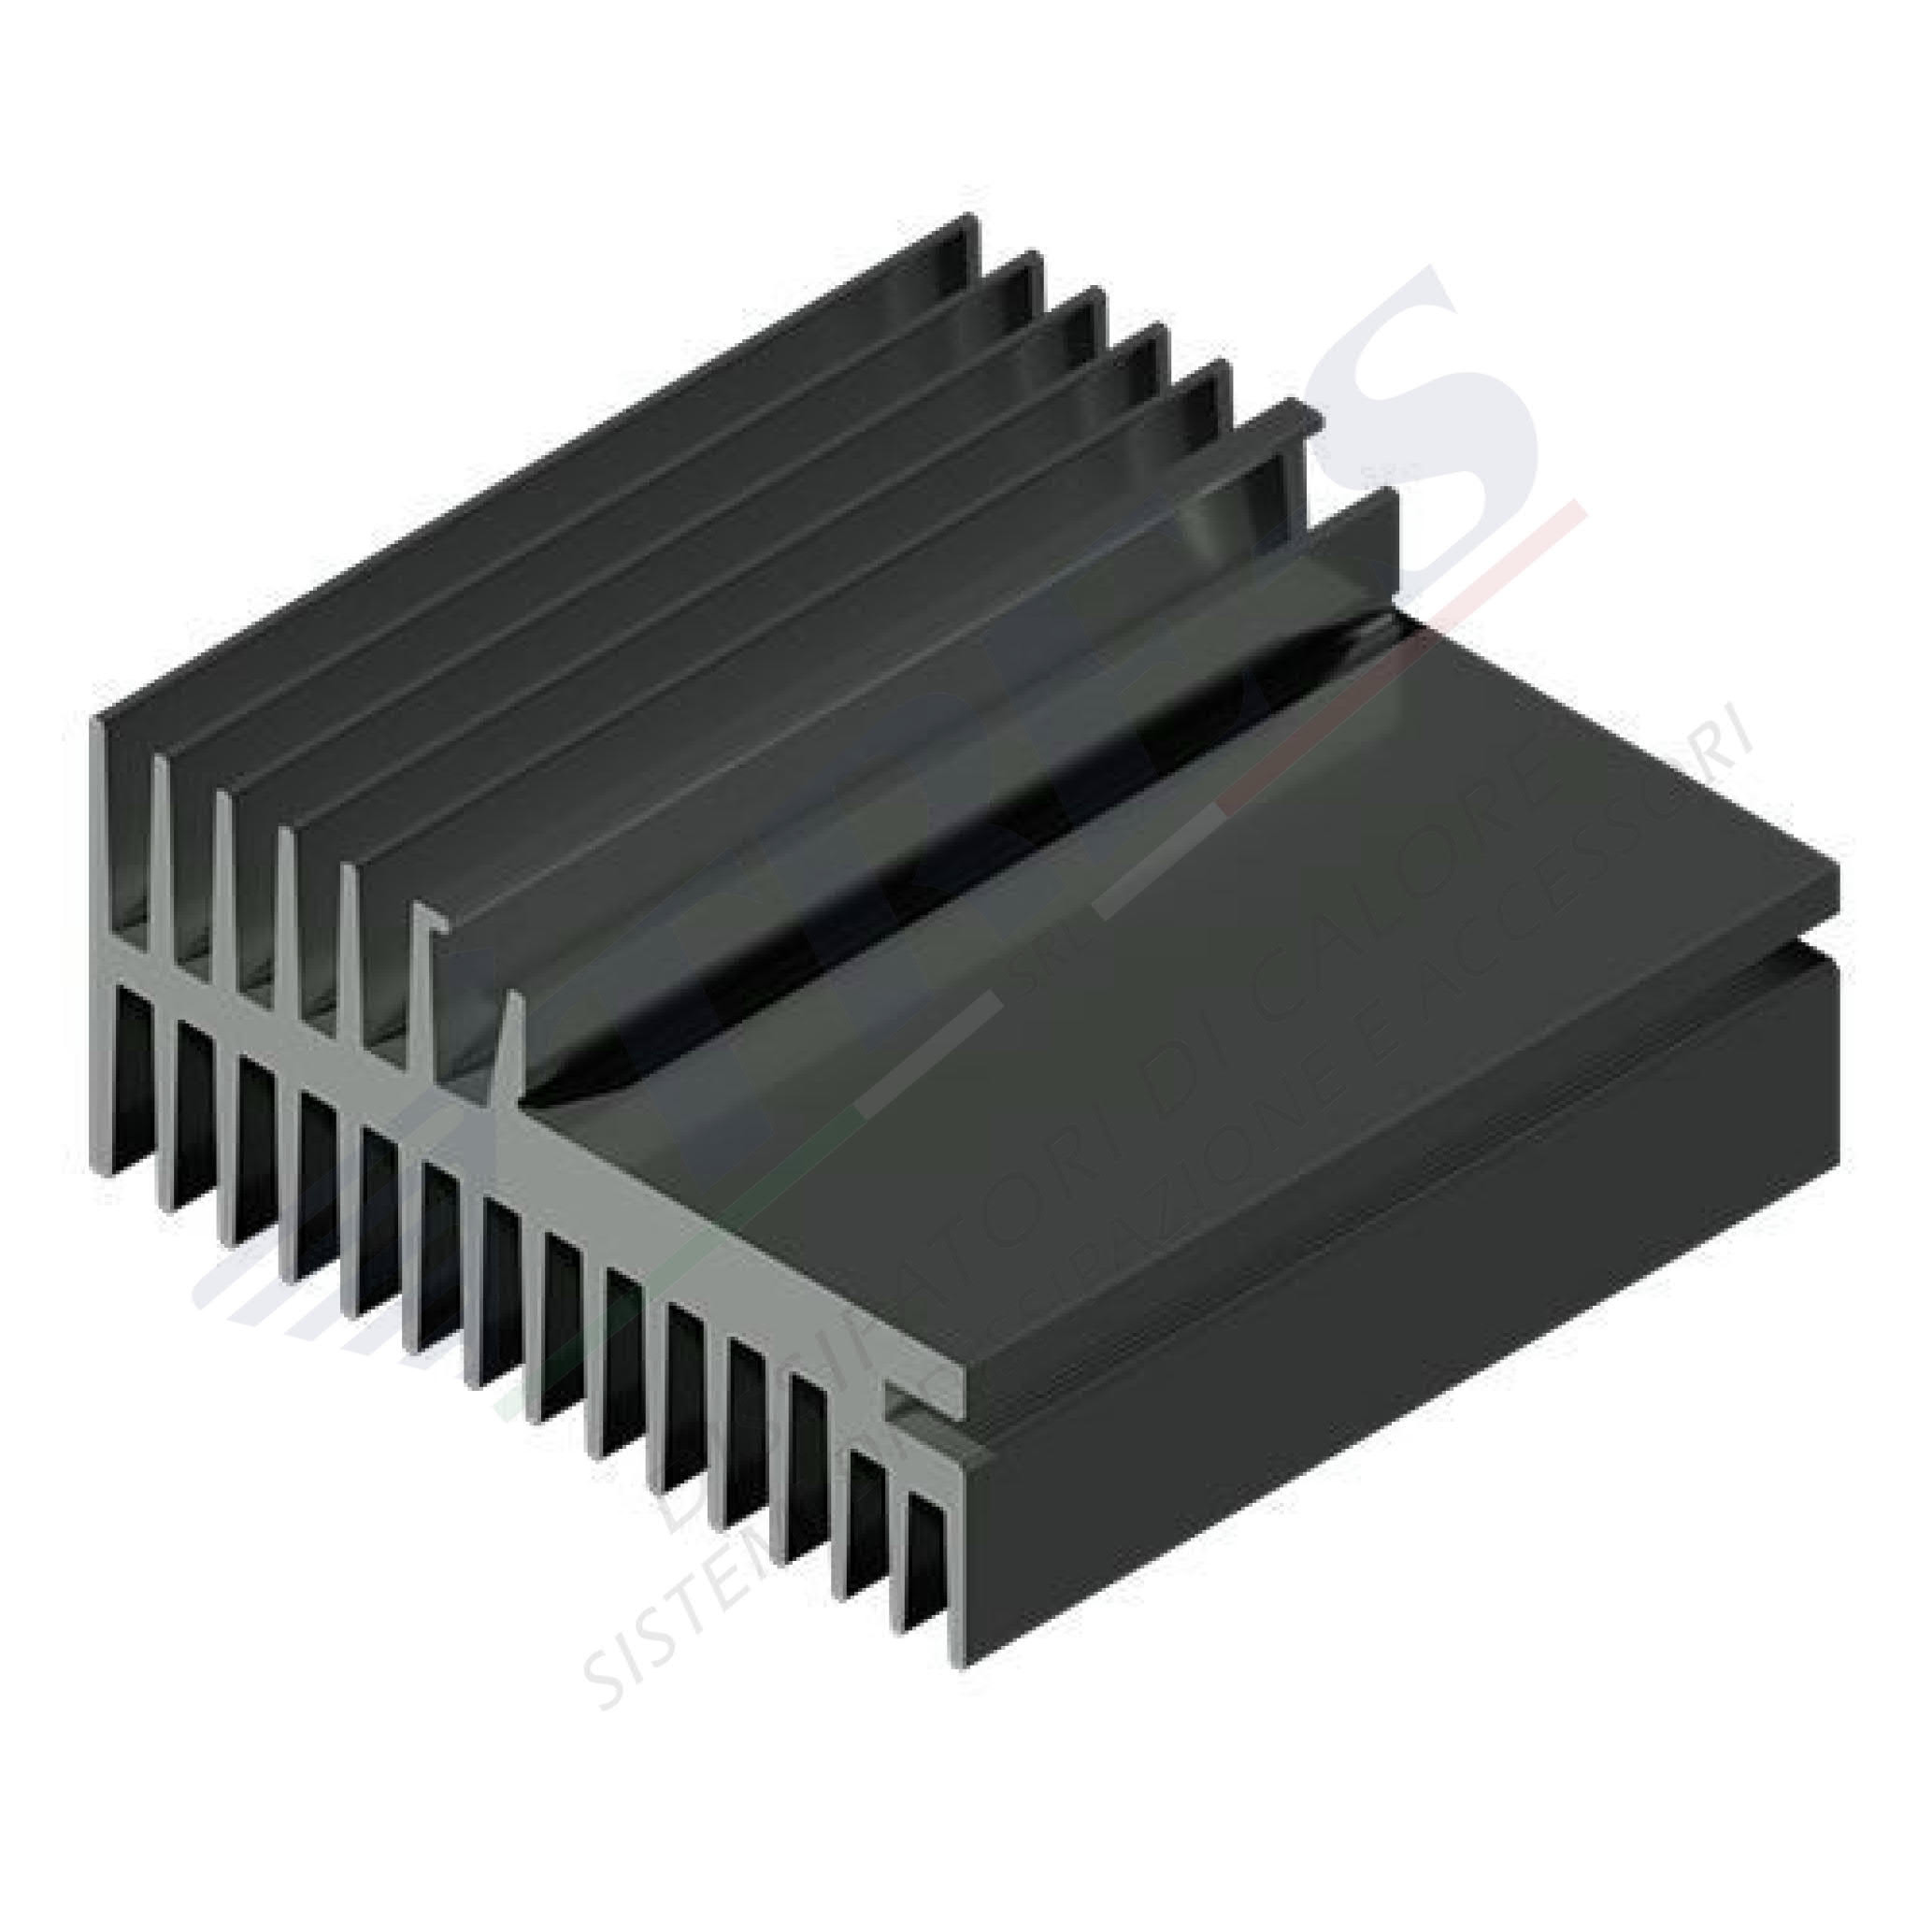 PRO1288 - Heat sinks with clip system